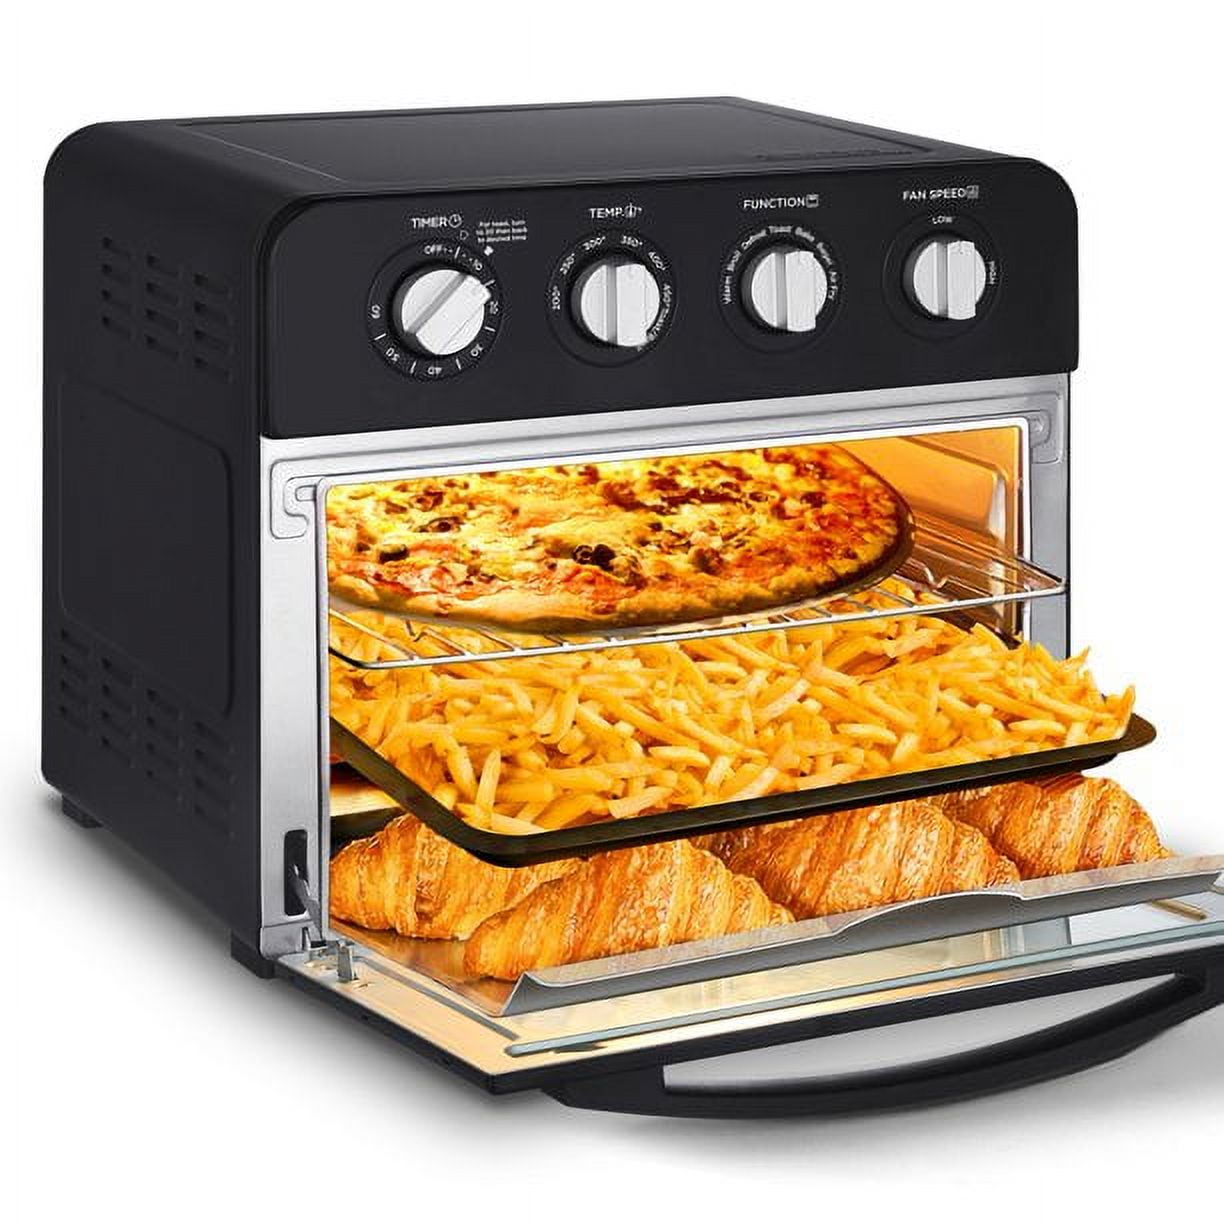 Can I use the included accessories in a microwave or oven with